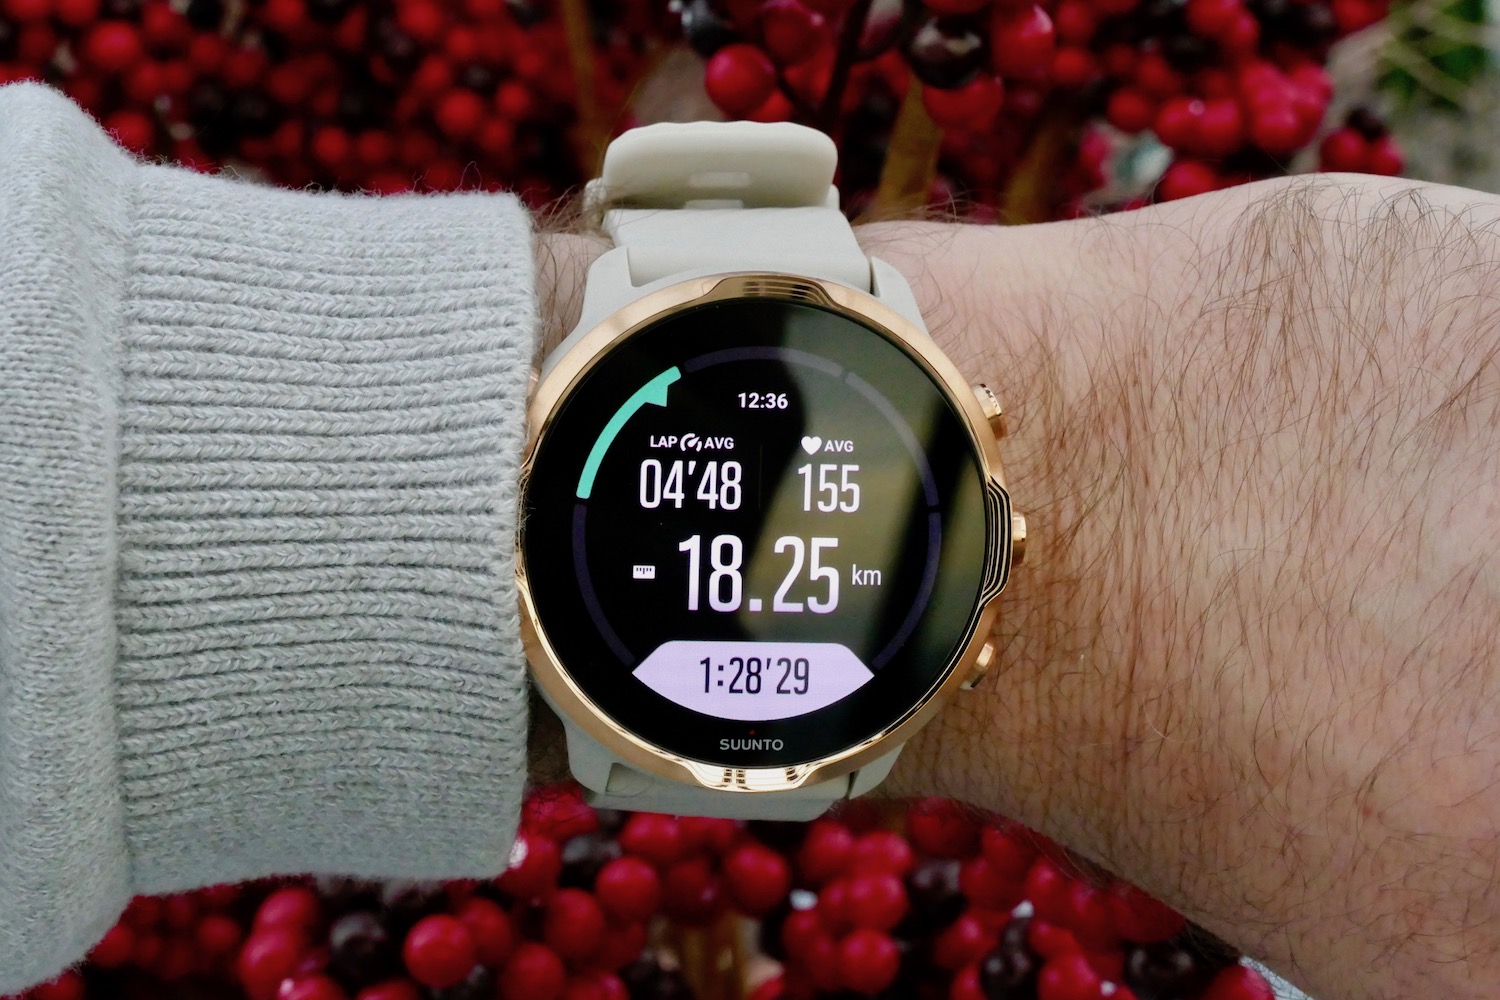 Hardcore Suunto 7 Takes on the Apple Watch in its Toughest Race Yet